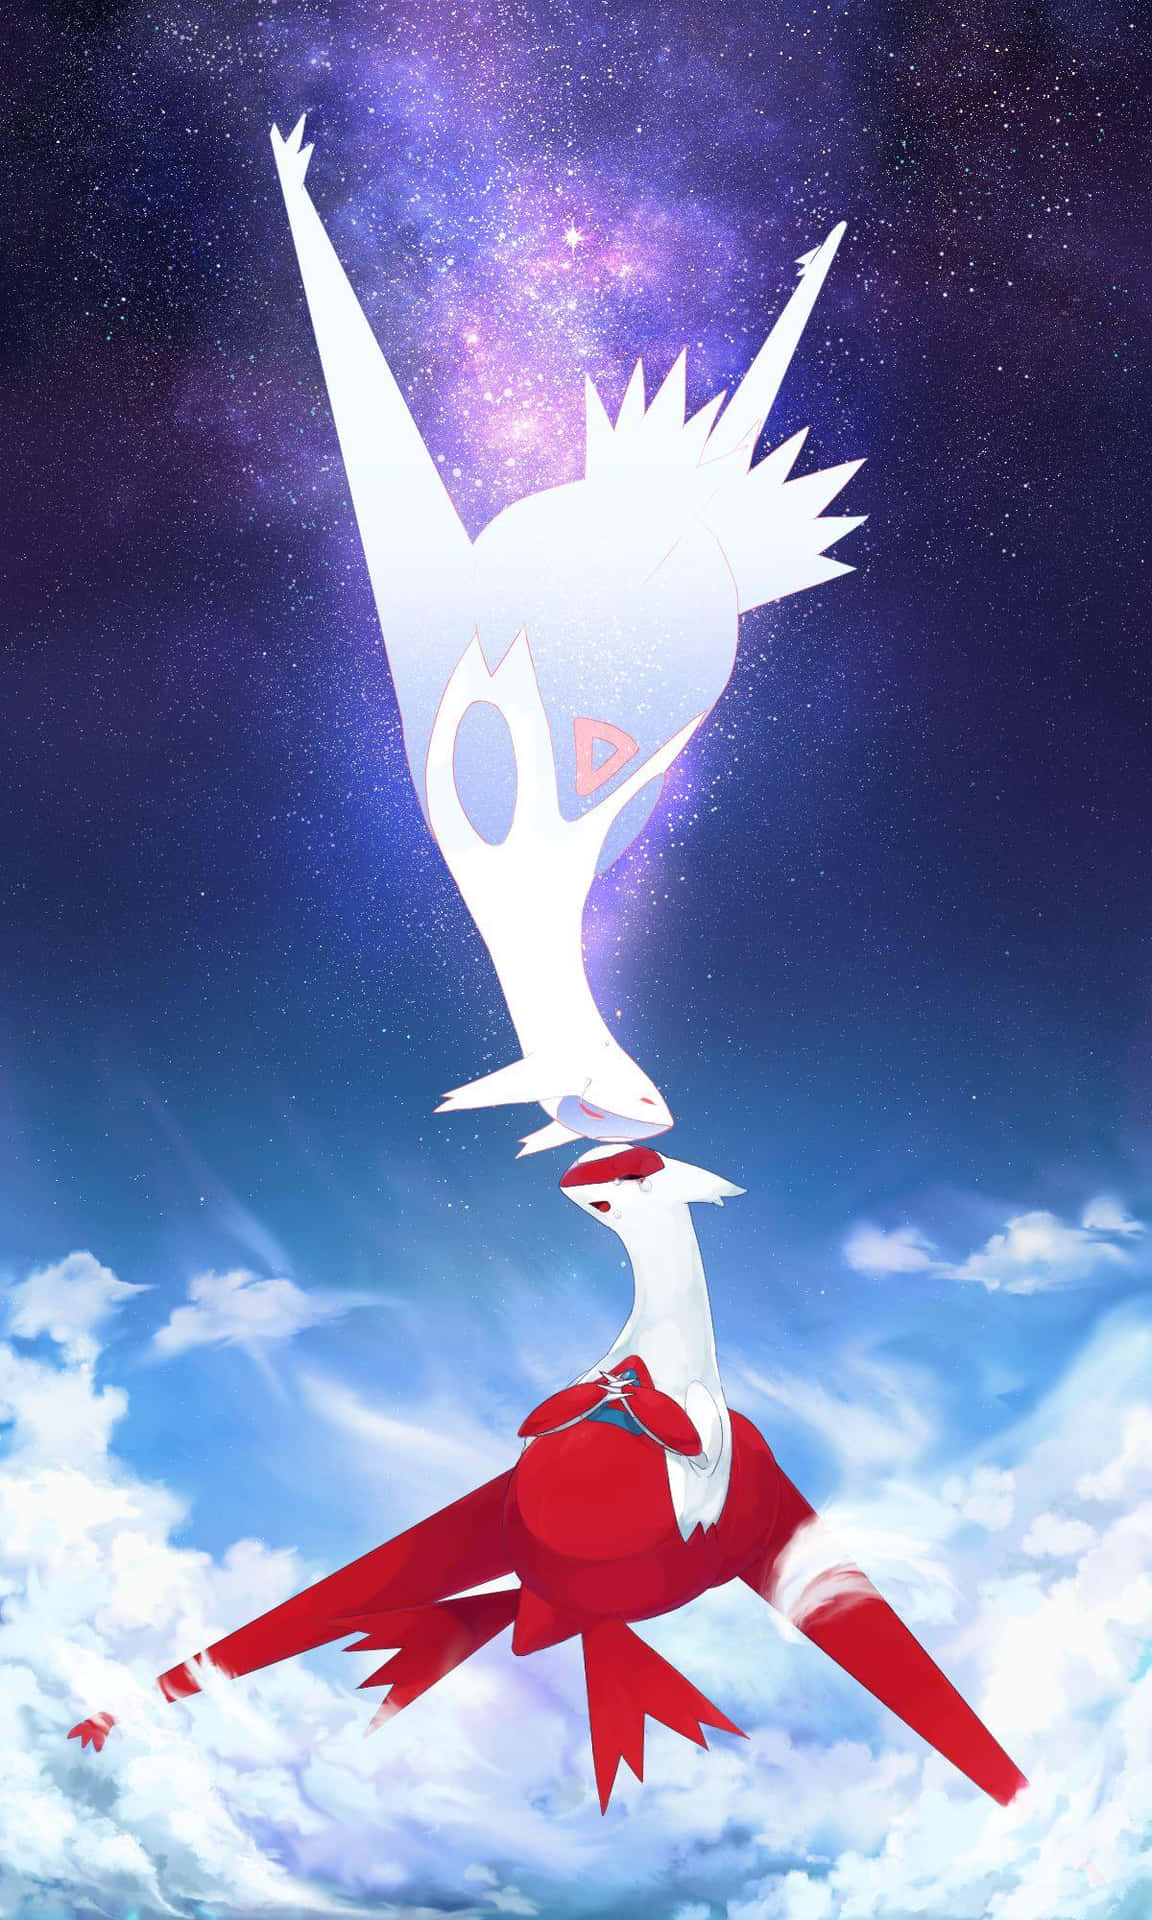 Latias Bumping Heads With Gleaming Latios Wallpaper